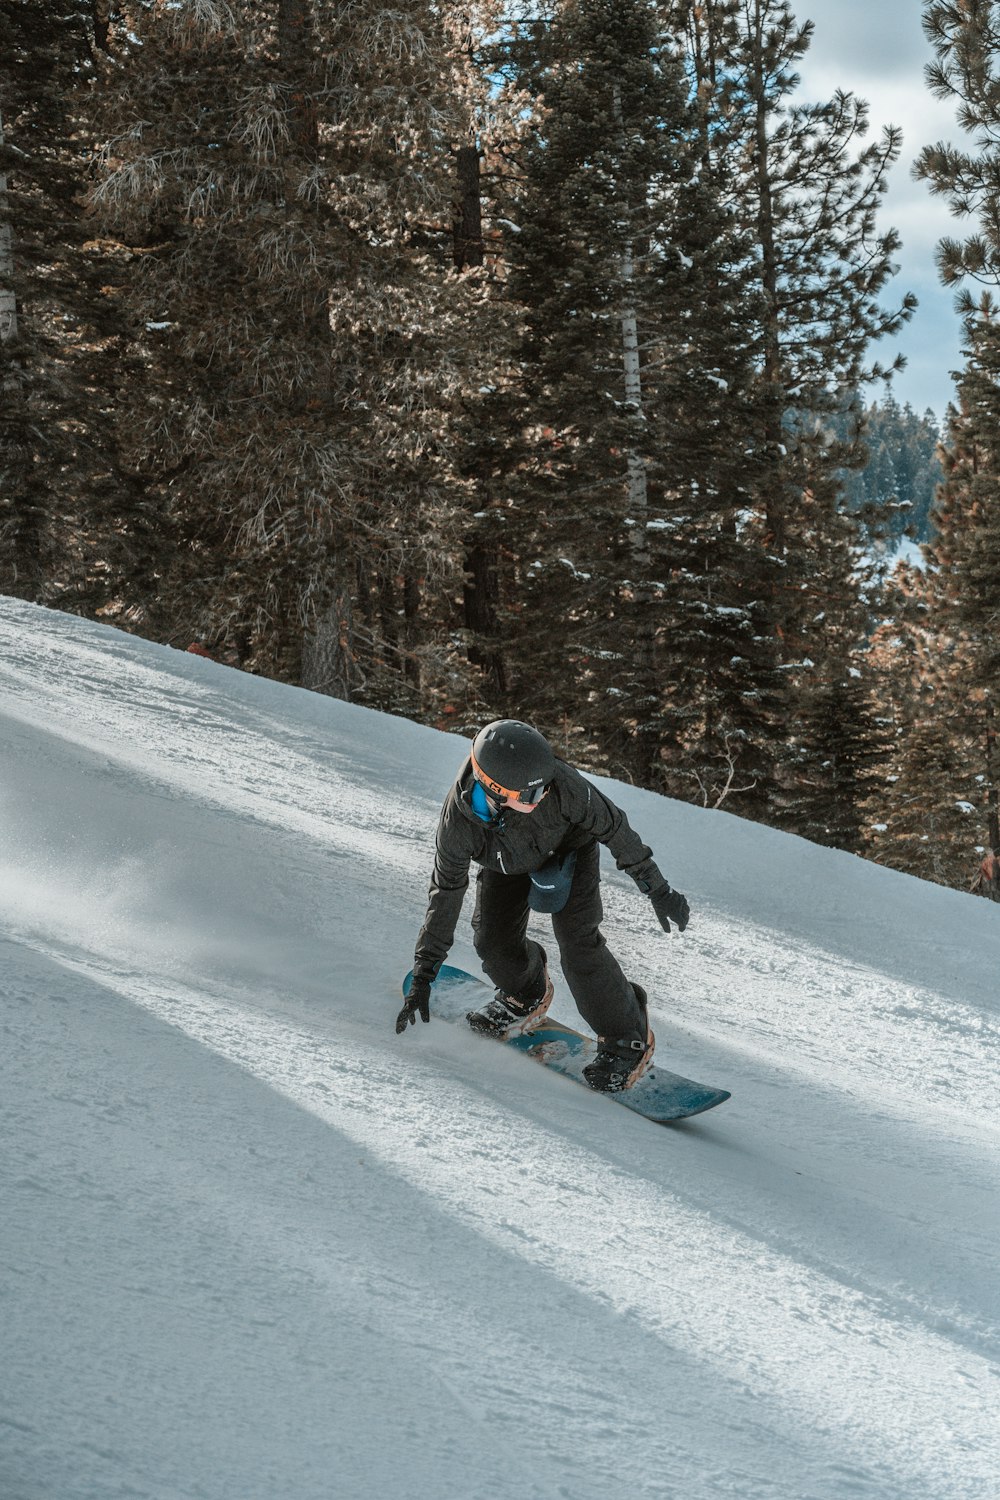 man in black jacket and blue pants riding on snowboard on snow covered ground during daytime